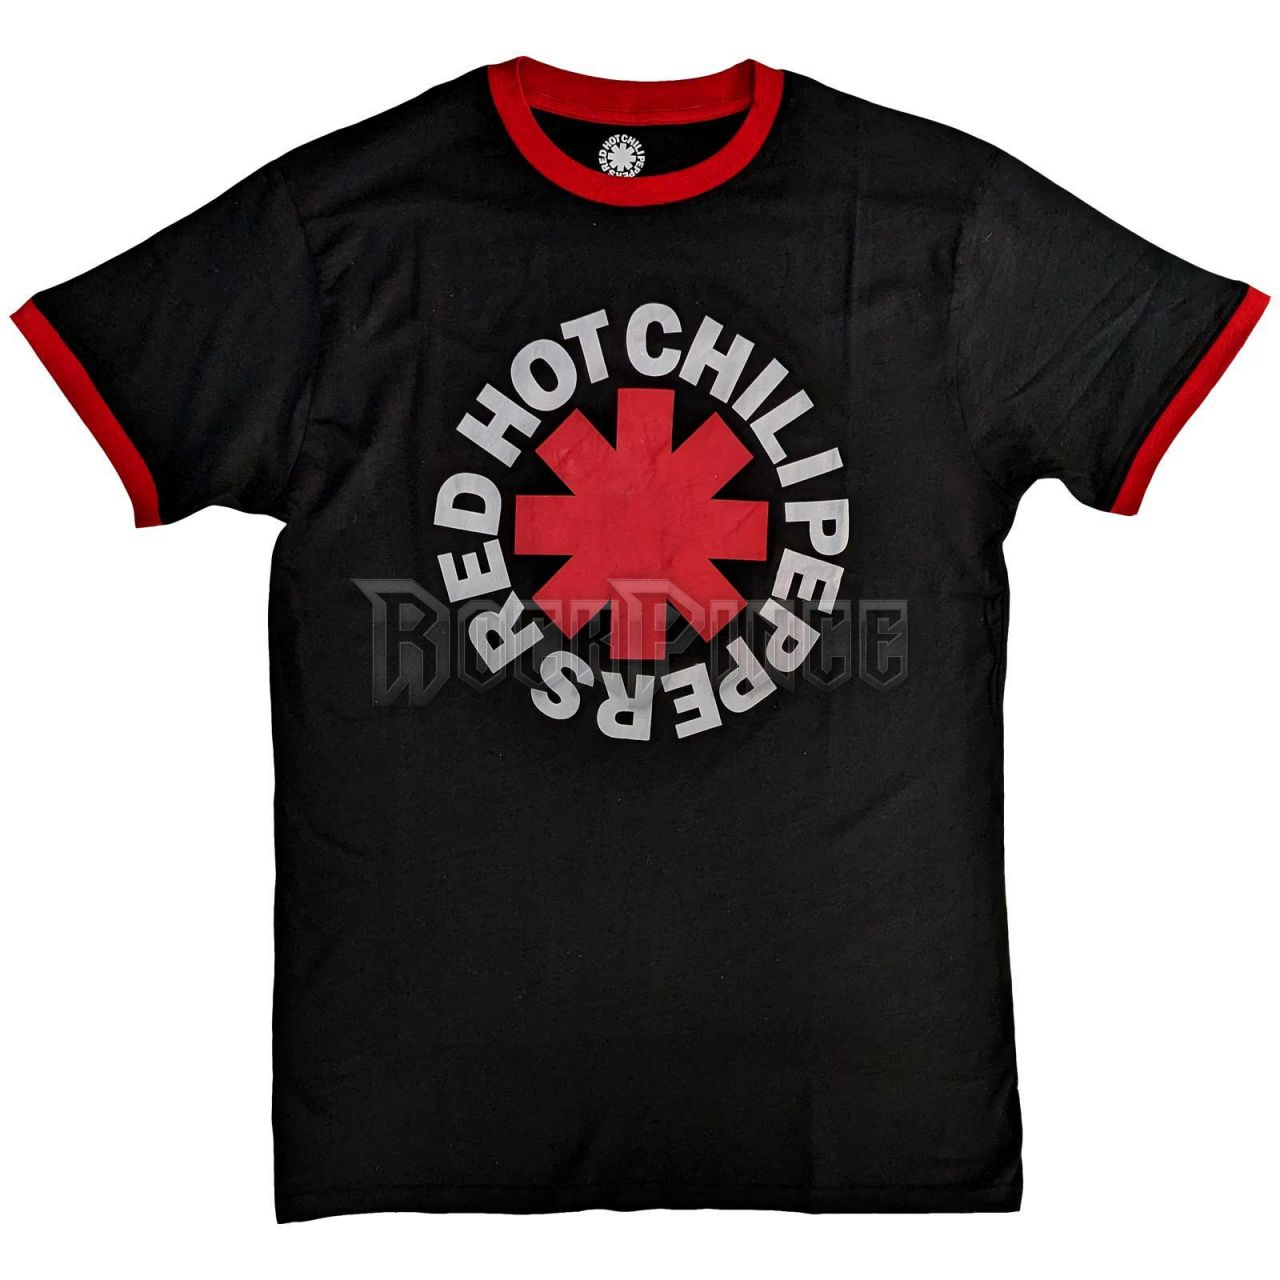 Red Hot Chili Peppers - Classic Asterisk - unisex póló - RHCPTS17MB